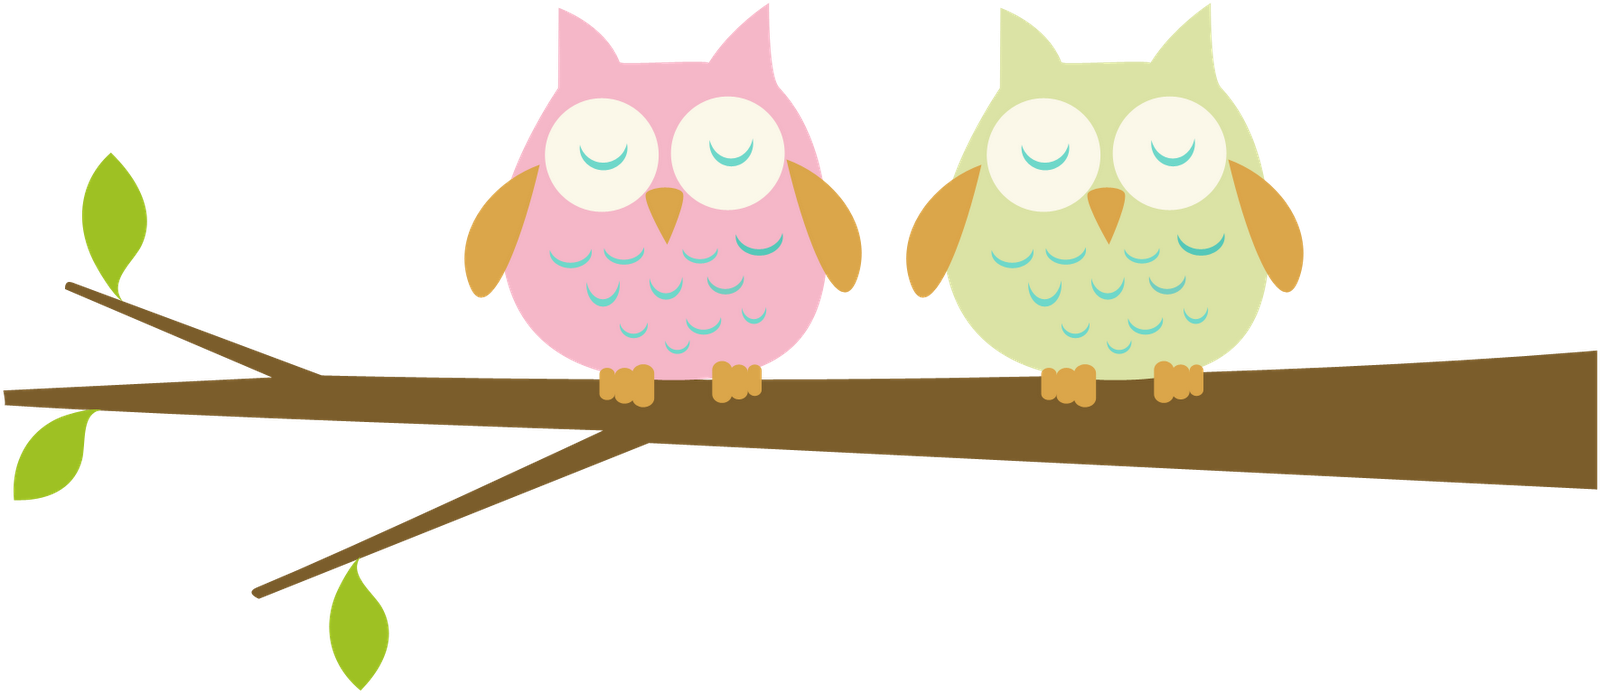 baby owl clipart black and wh - Baby Owl Clipart